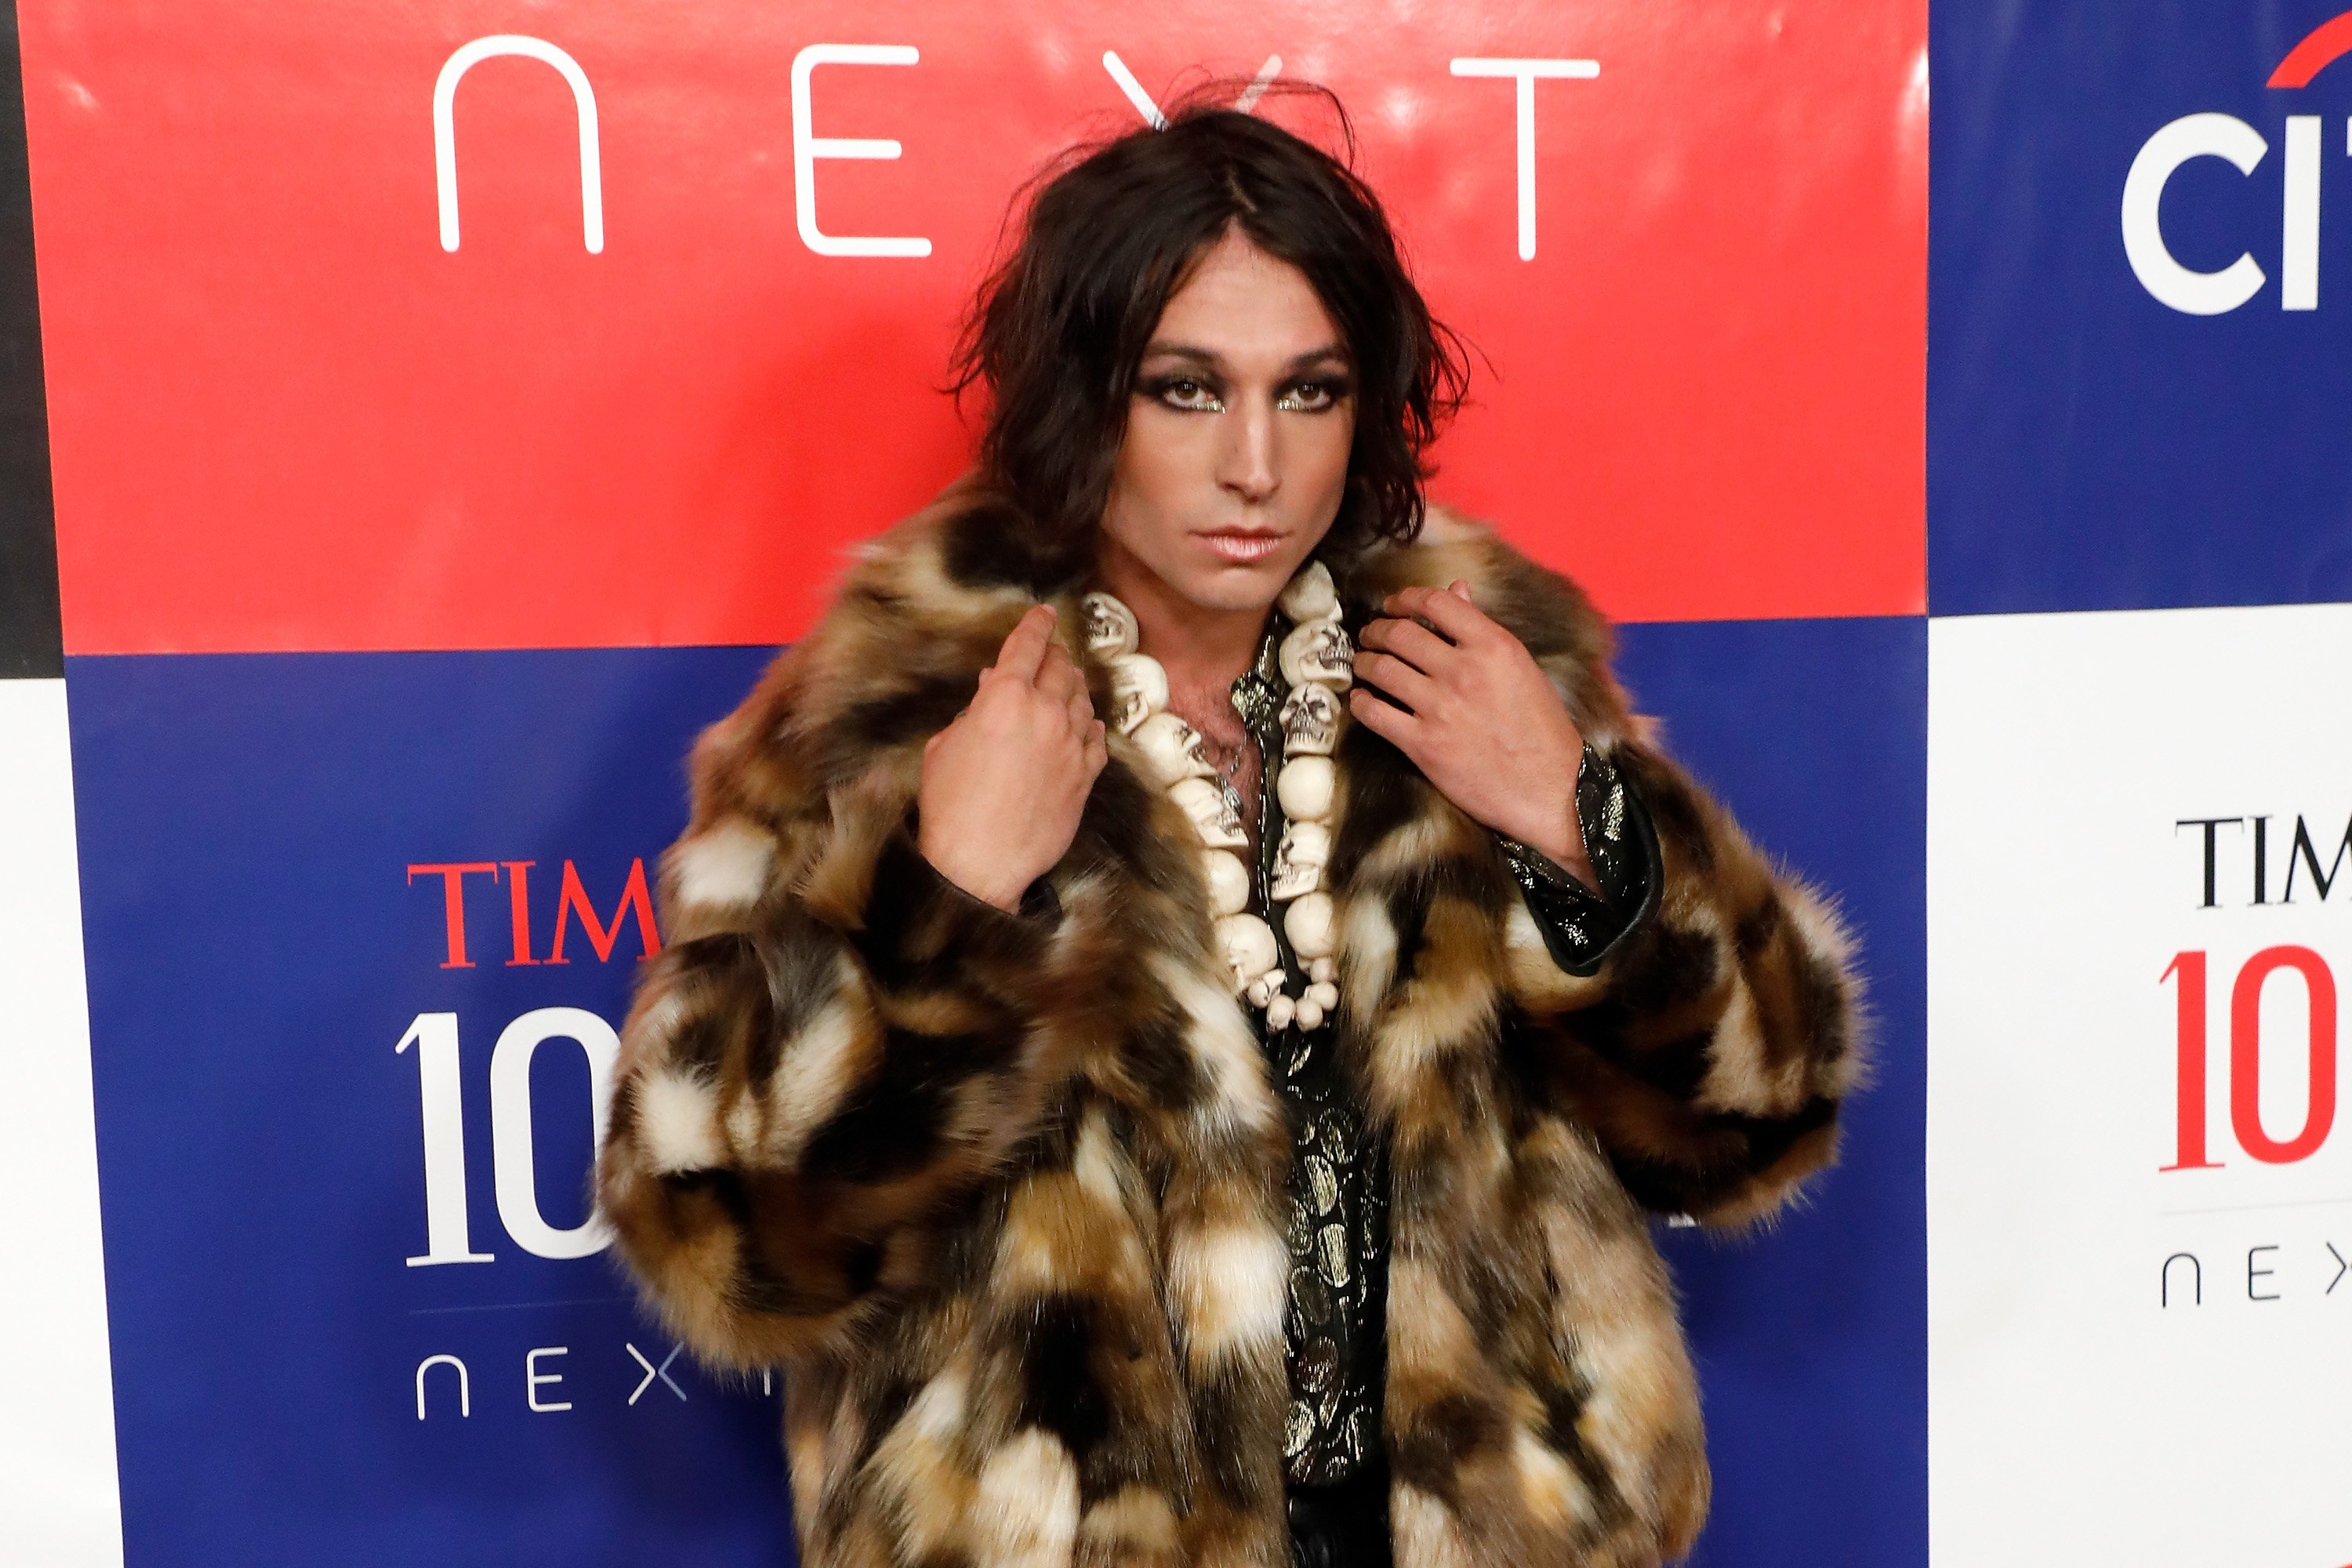 Ezra Miller at the Time100 Next event on November 14, 2019 | Source: Getty Images